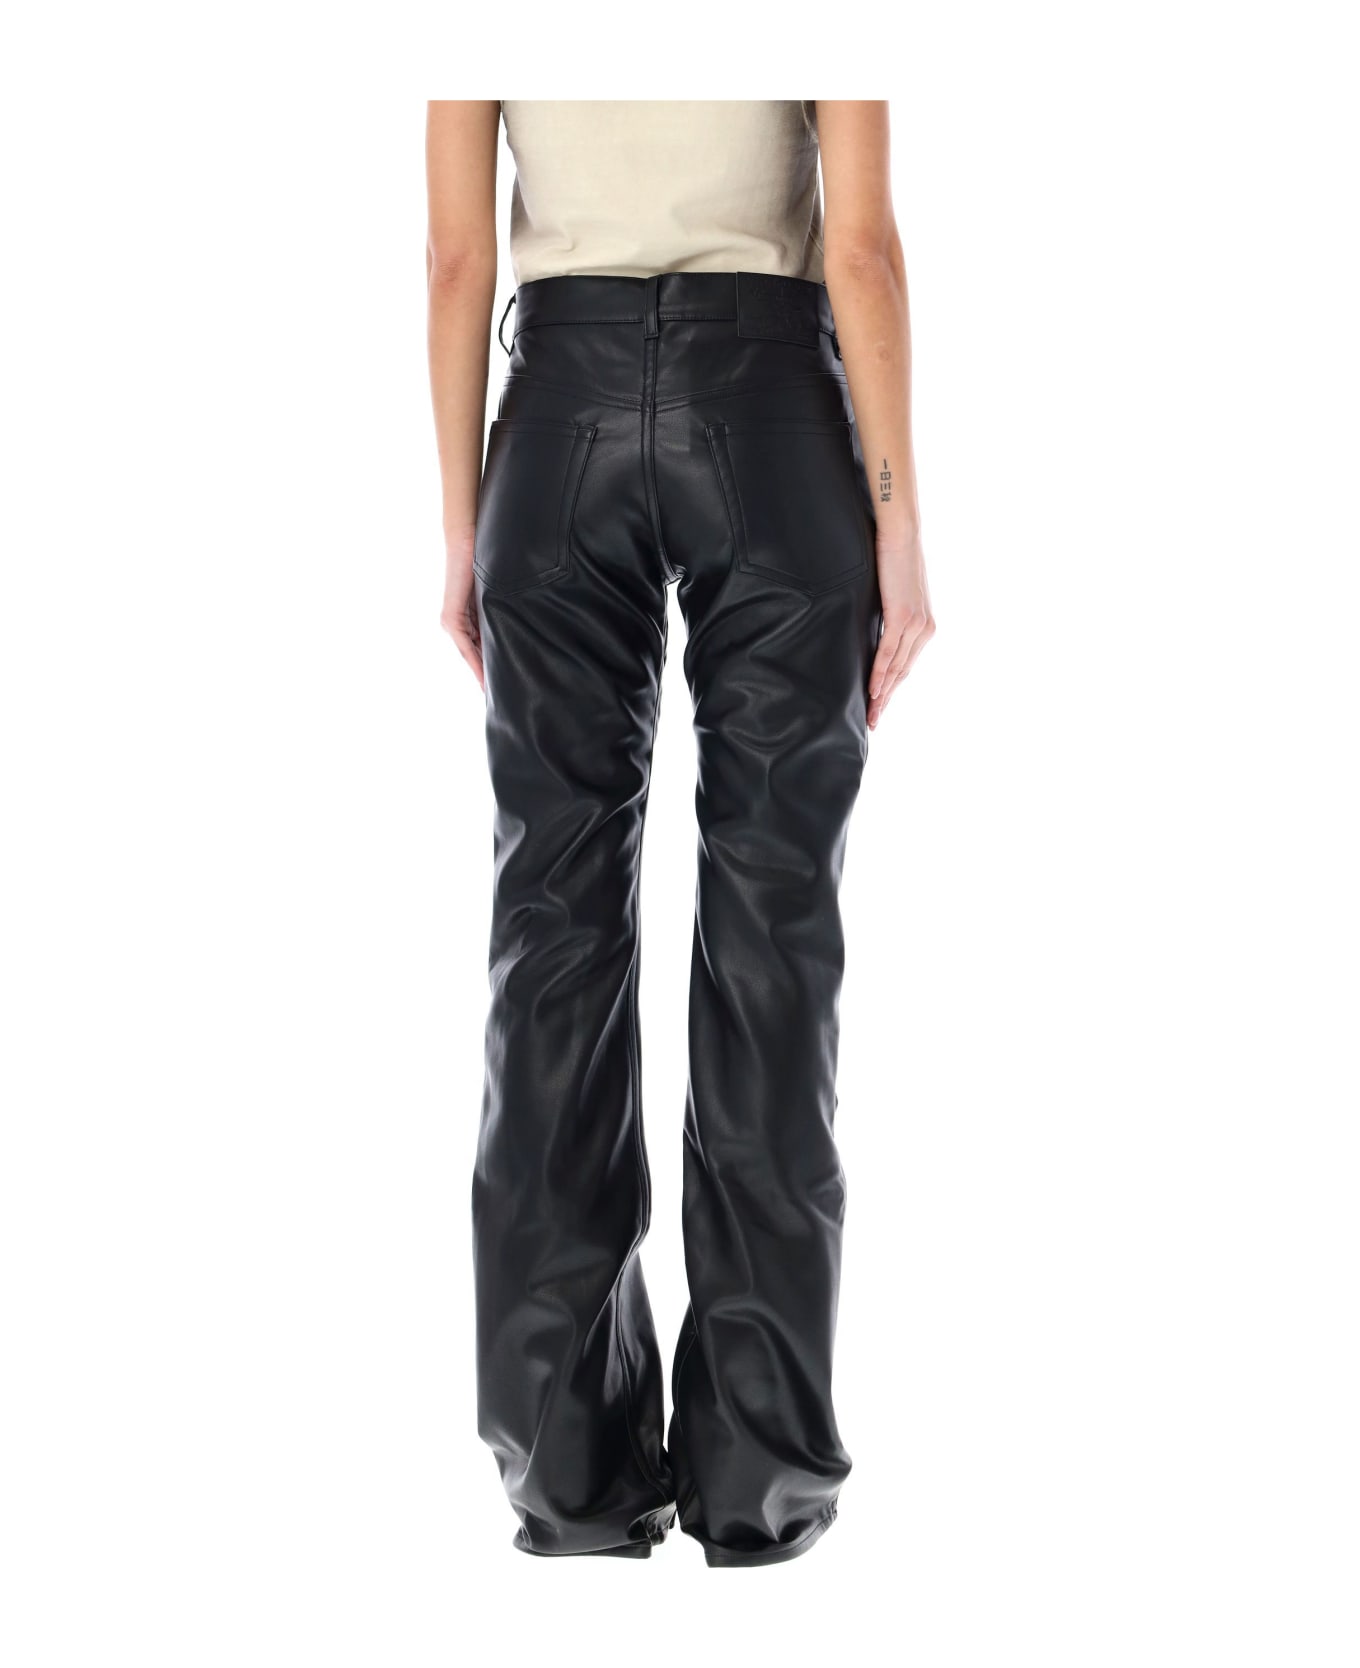 Y/Project Eco Leather Pants - BLACK